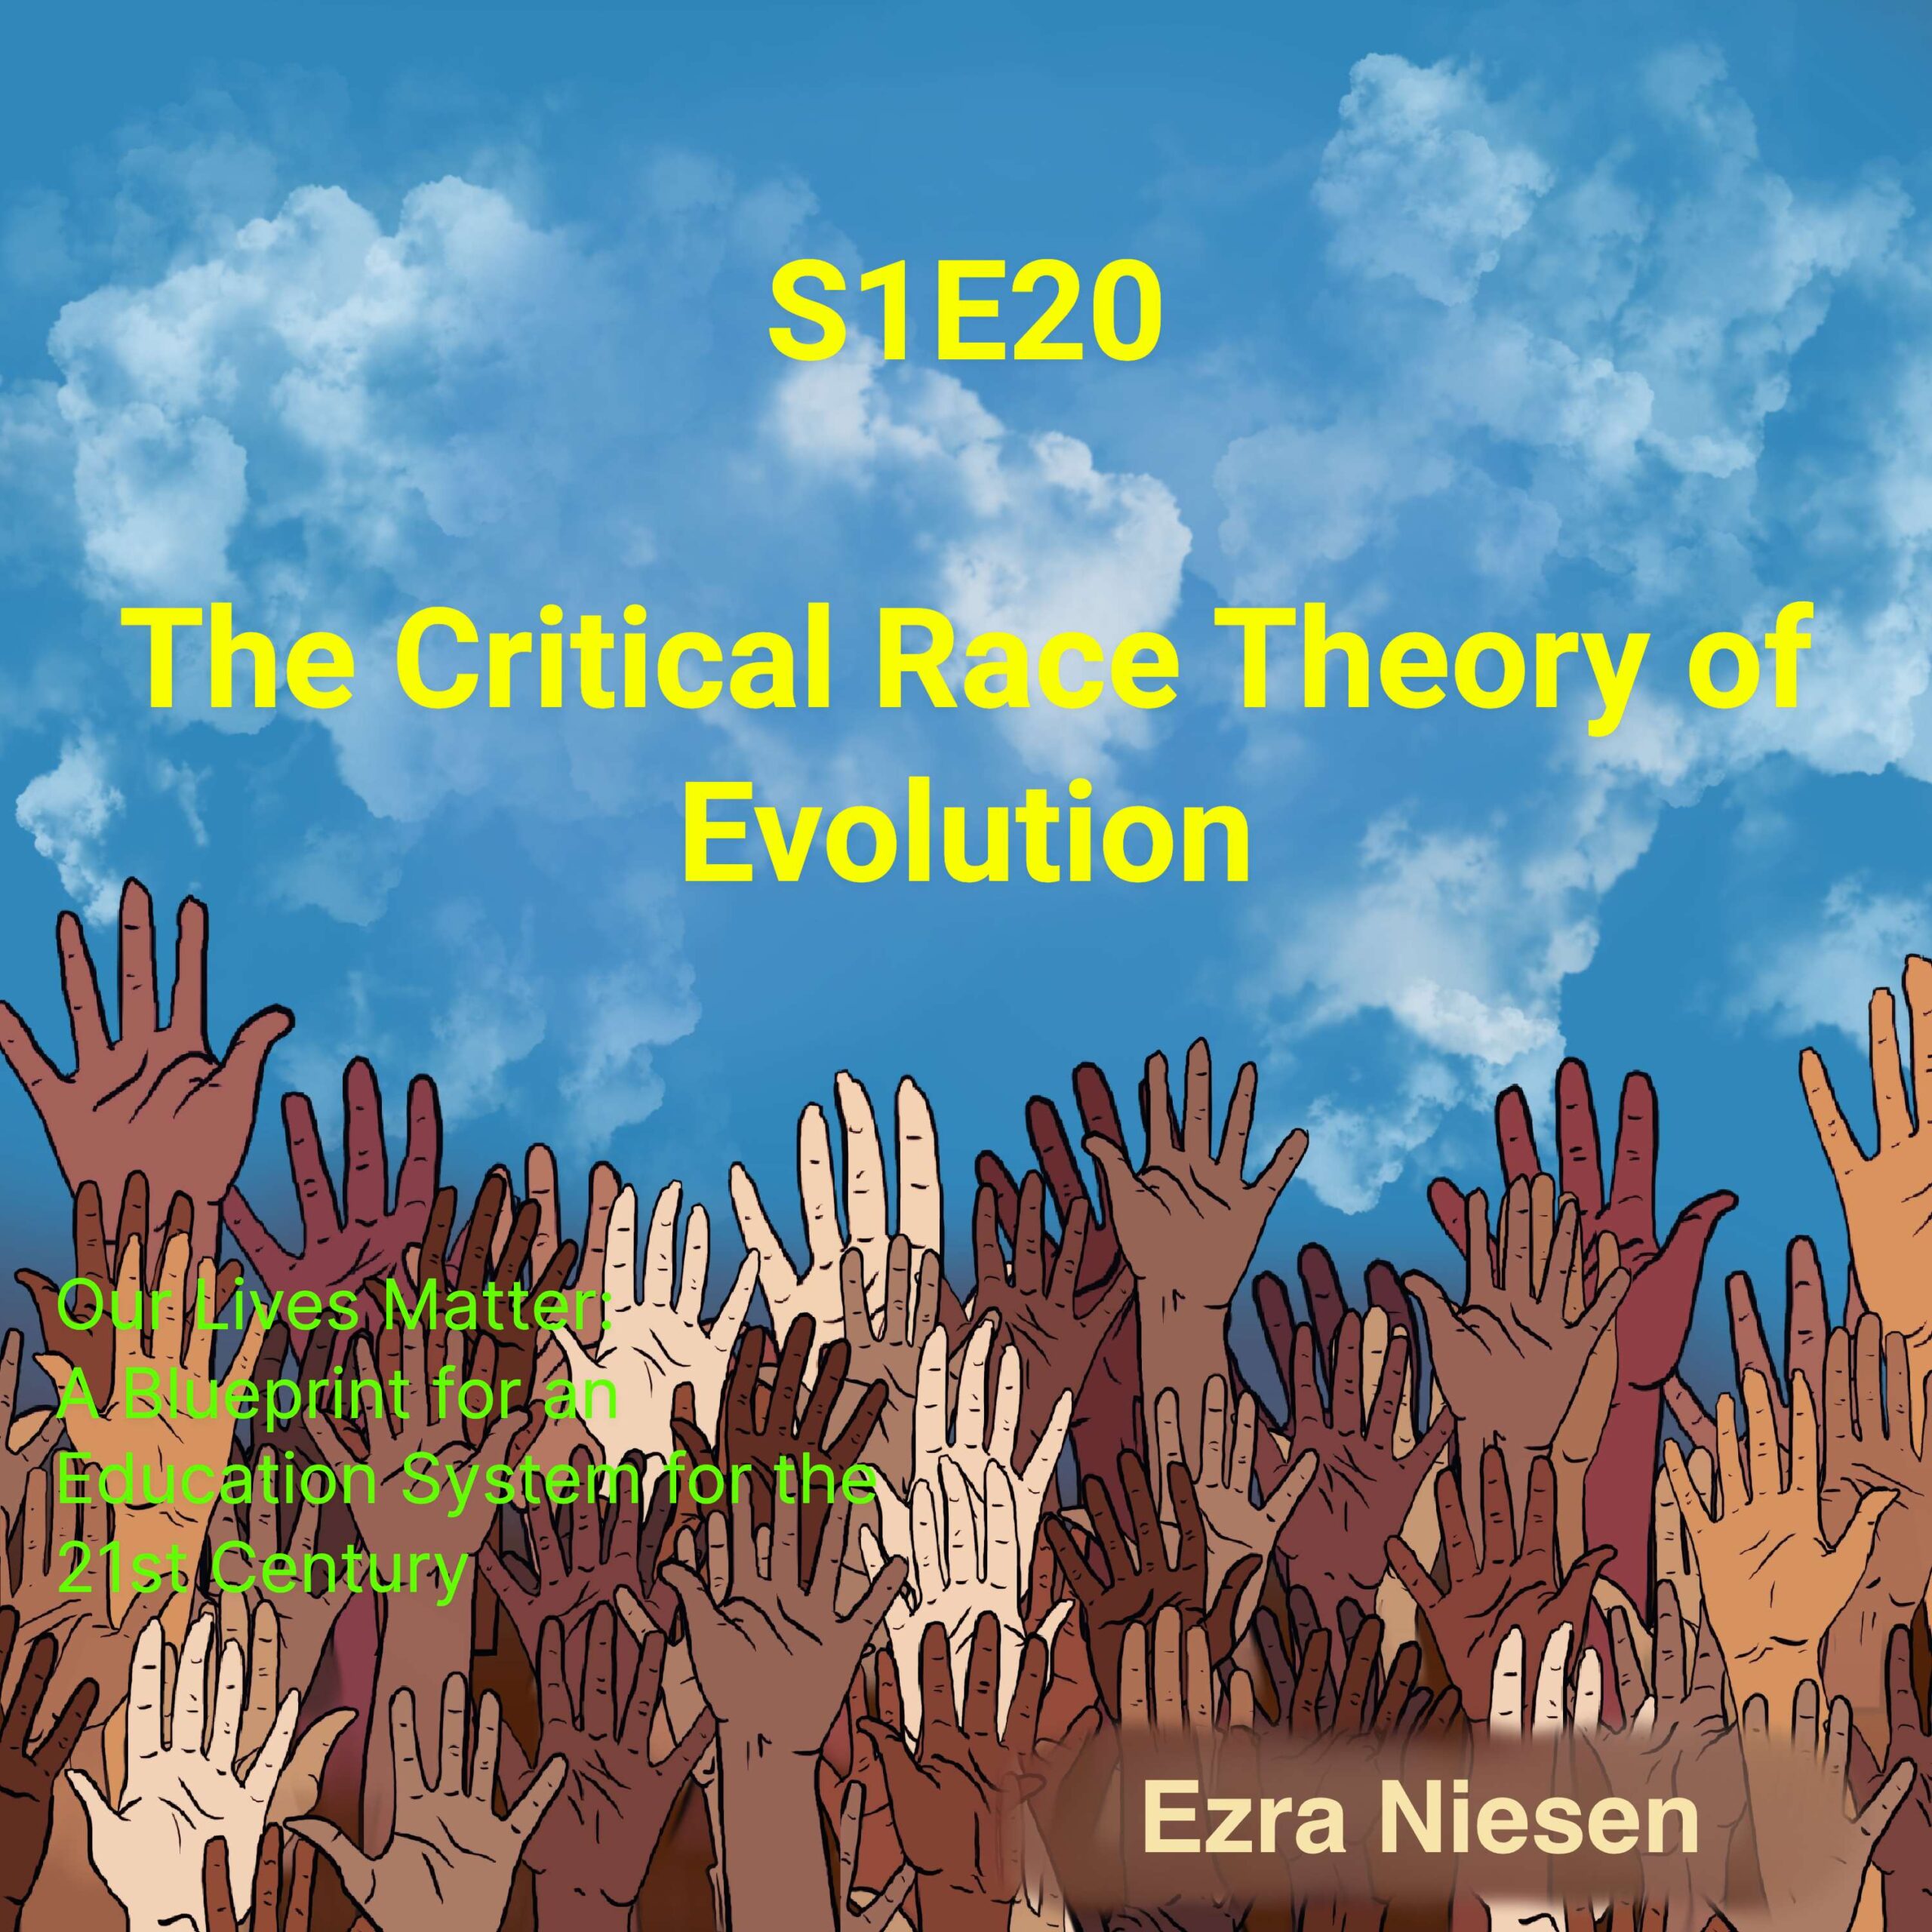 Our Lives Matter S1E20:  The Critical Race Theory of Evolution